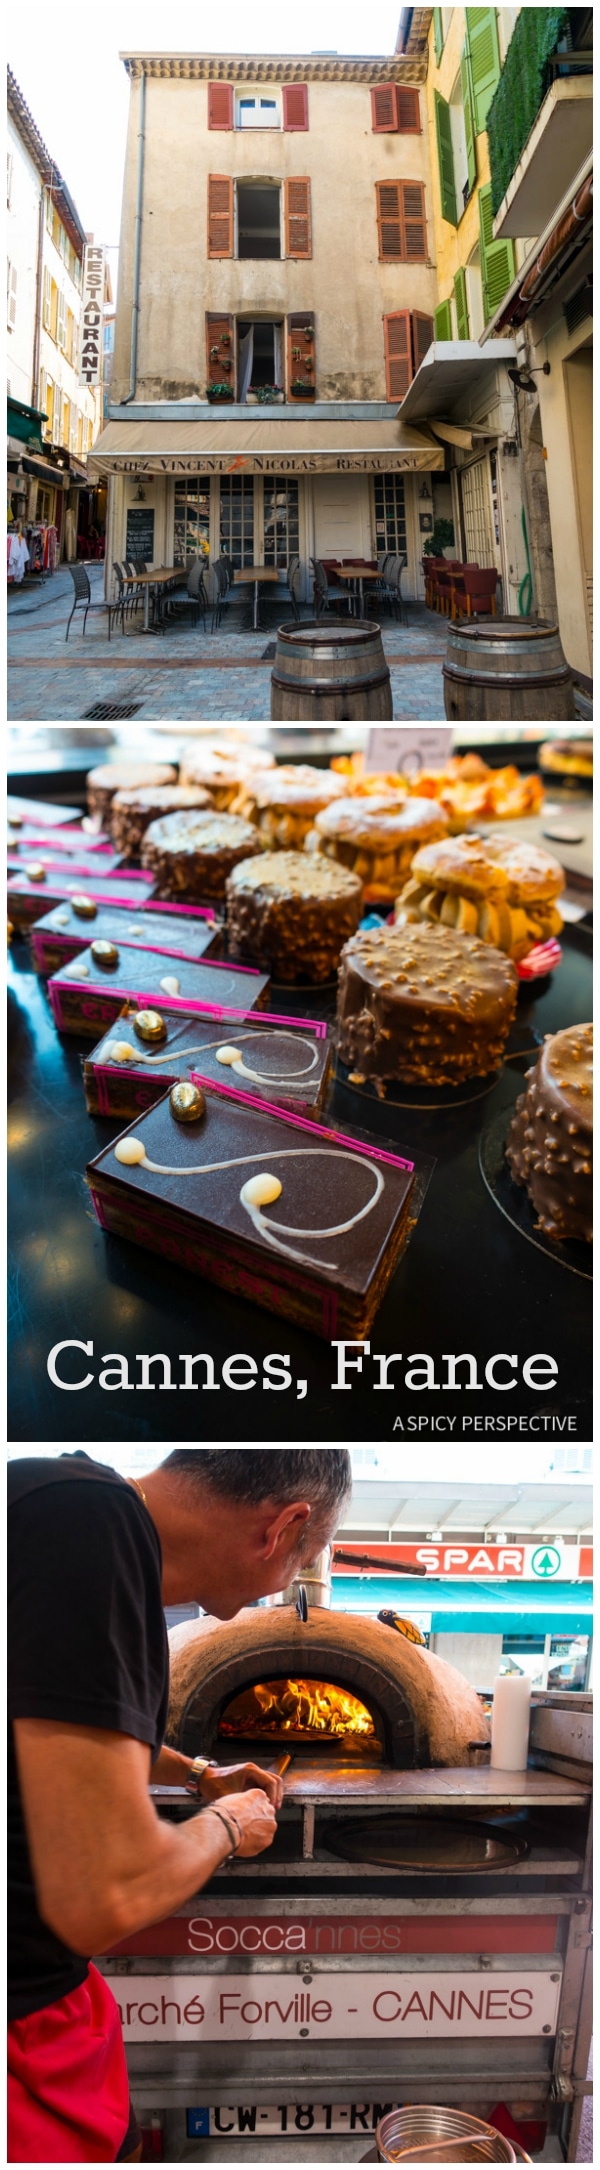 Exploring Cannes, France on ASpicyPerspective.com - #Travel Tips and Photography in #France